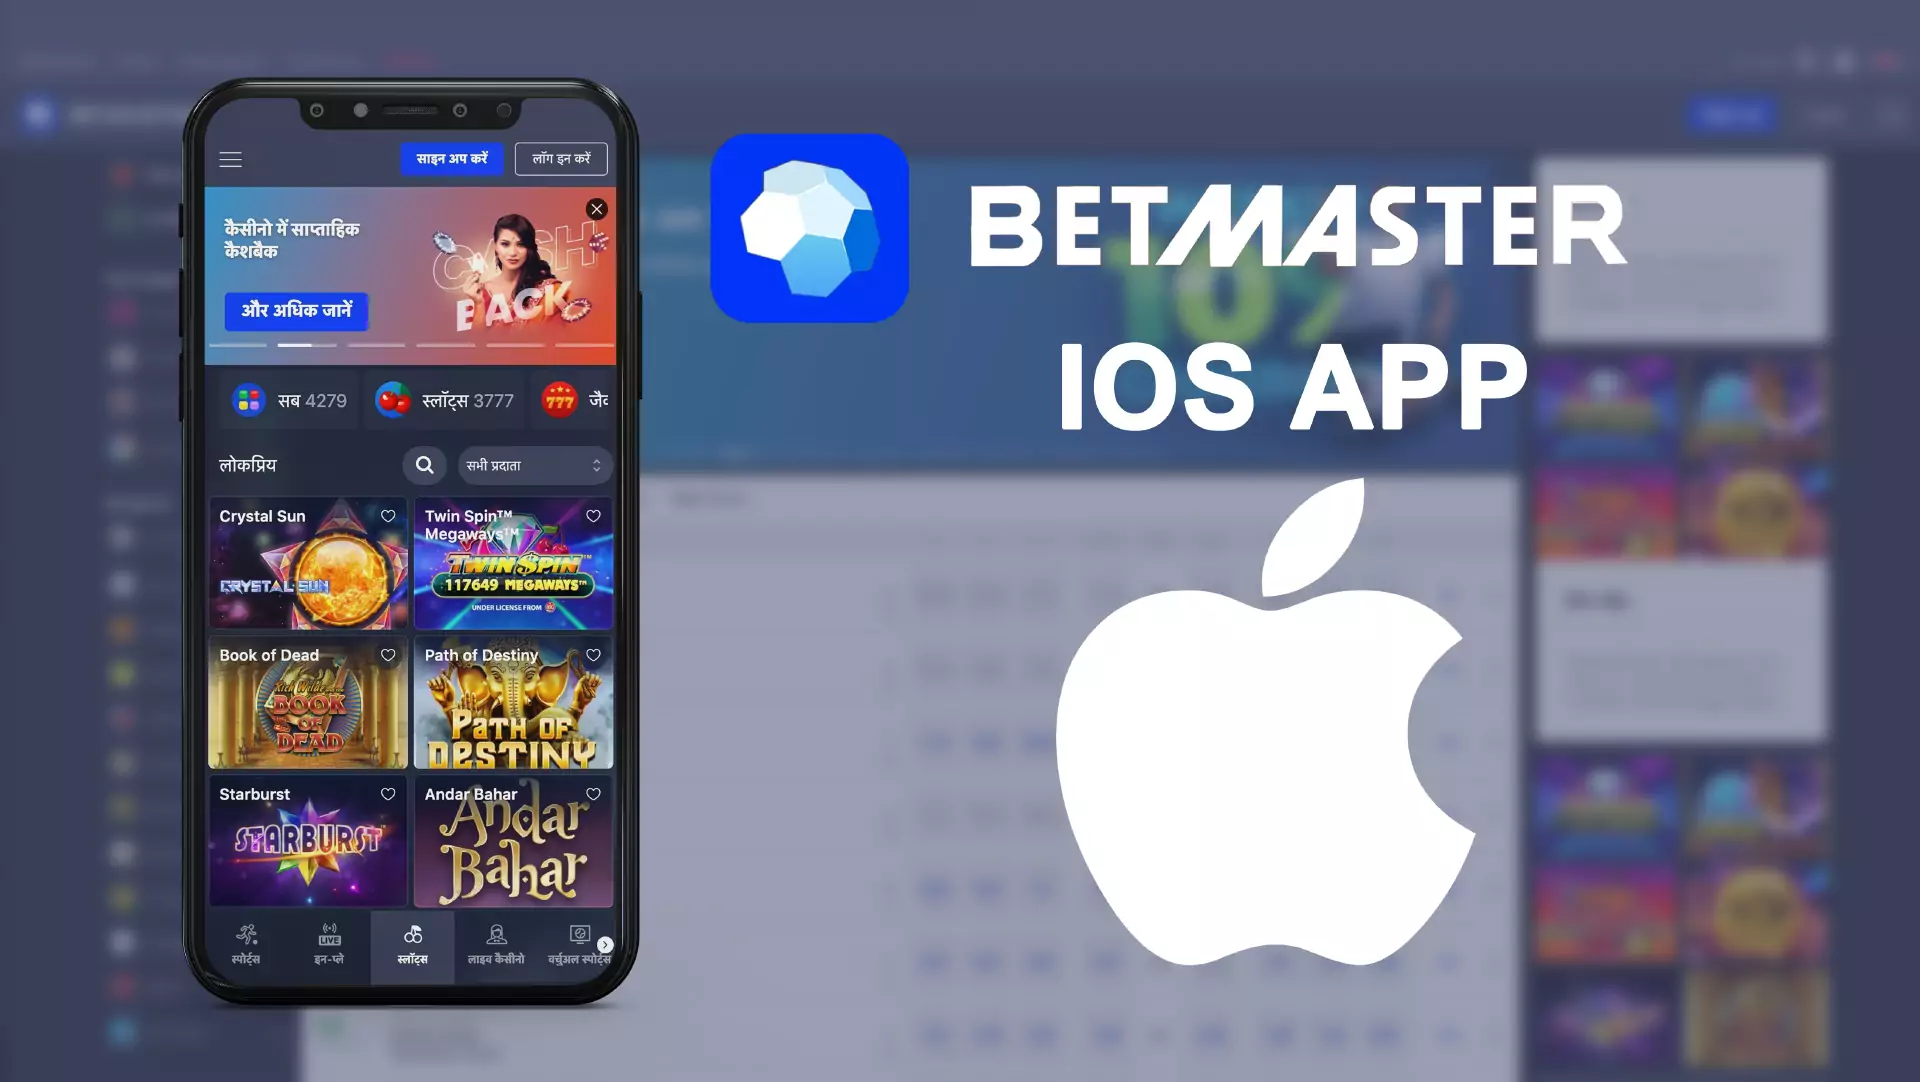 Download the Betmaster app from the website for your iphone.